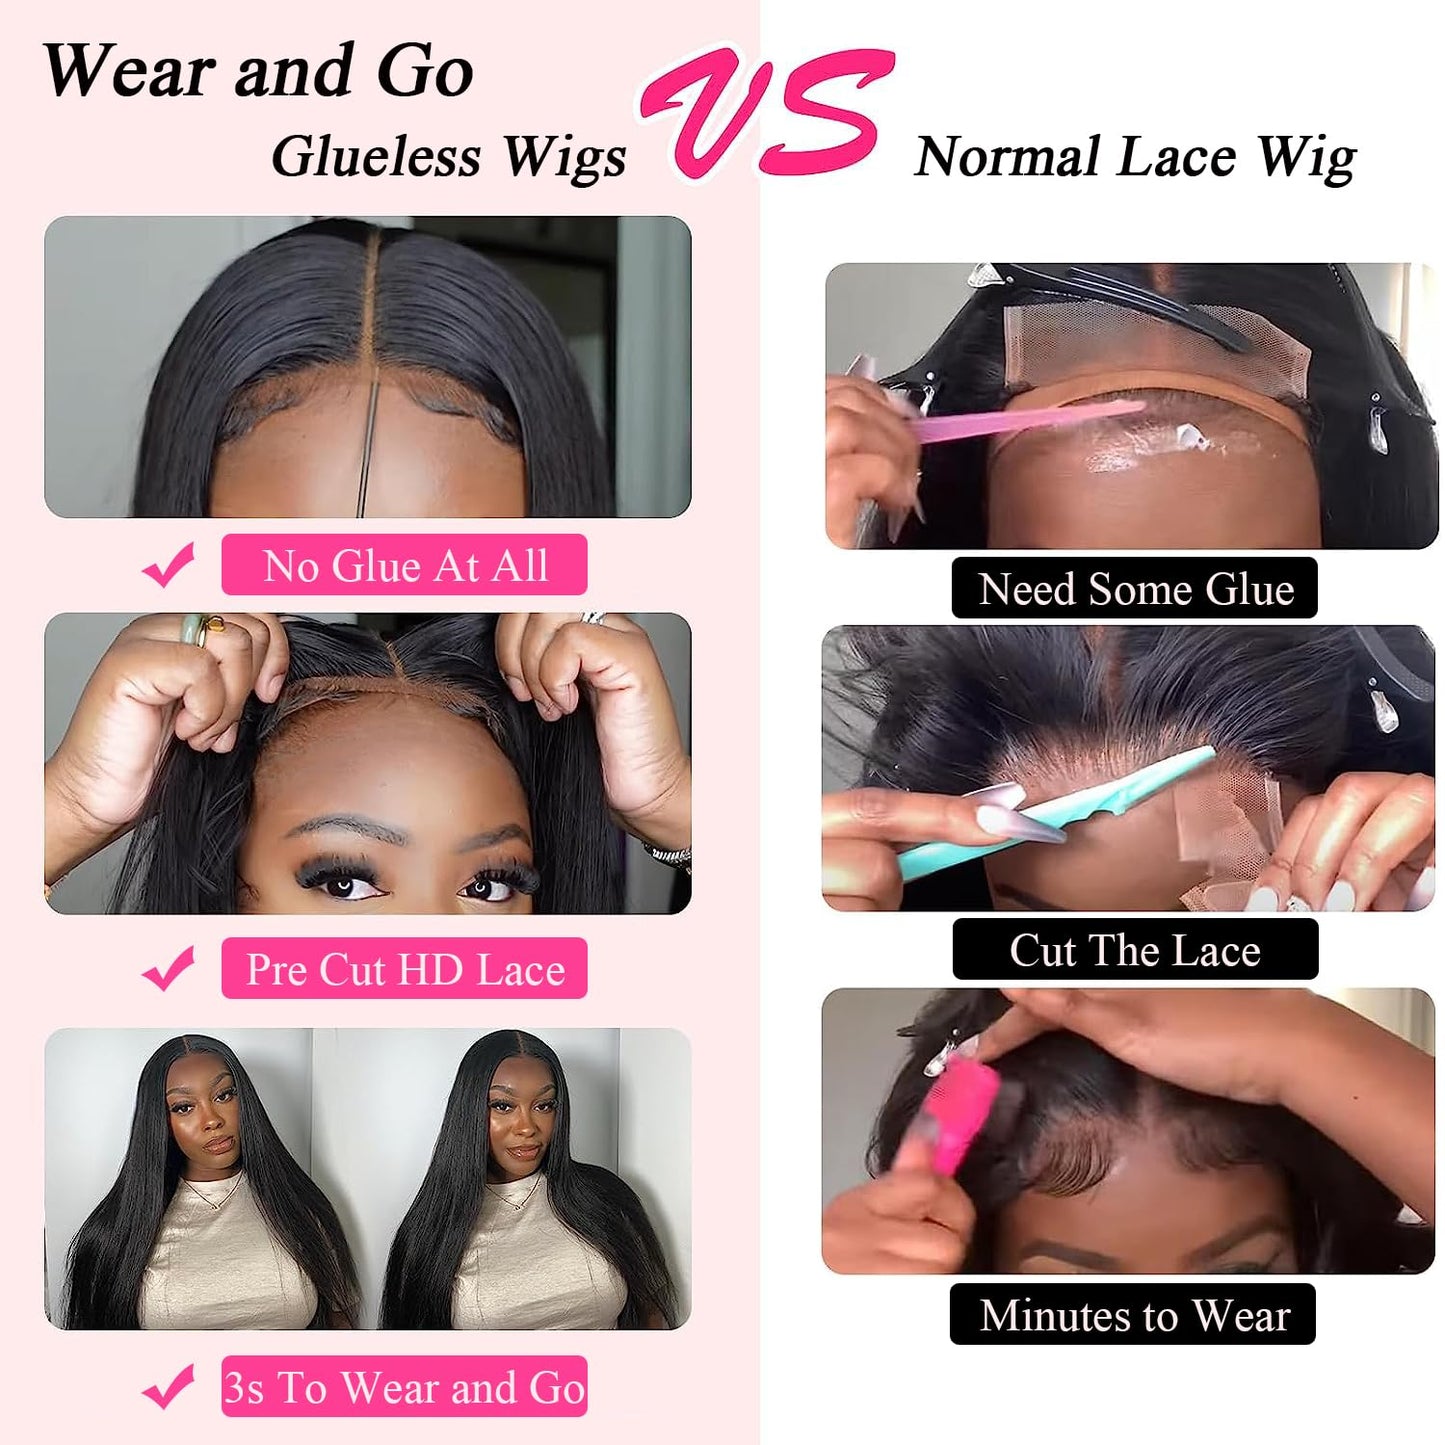 Wear and Go Glueless Wigs Human Hair Pre Plucked Pre Cut 5x5 HD Lace Closure Wigs Human Hair Straight Lace Front Wigs Human Hair for Women 180% Density 3 Seconds to Wear for Beginners 26 Inch